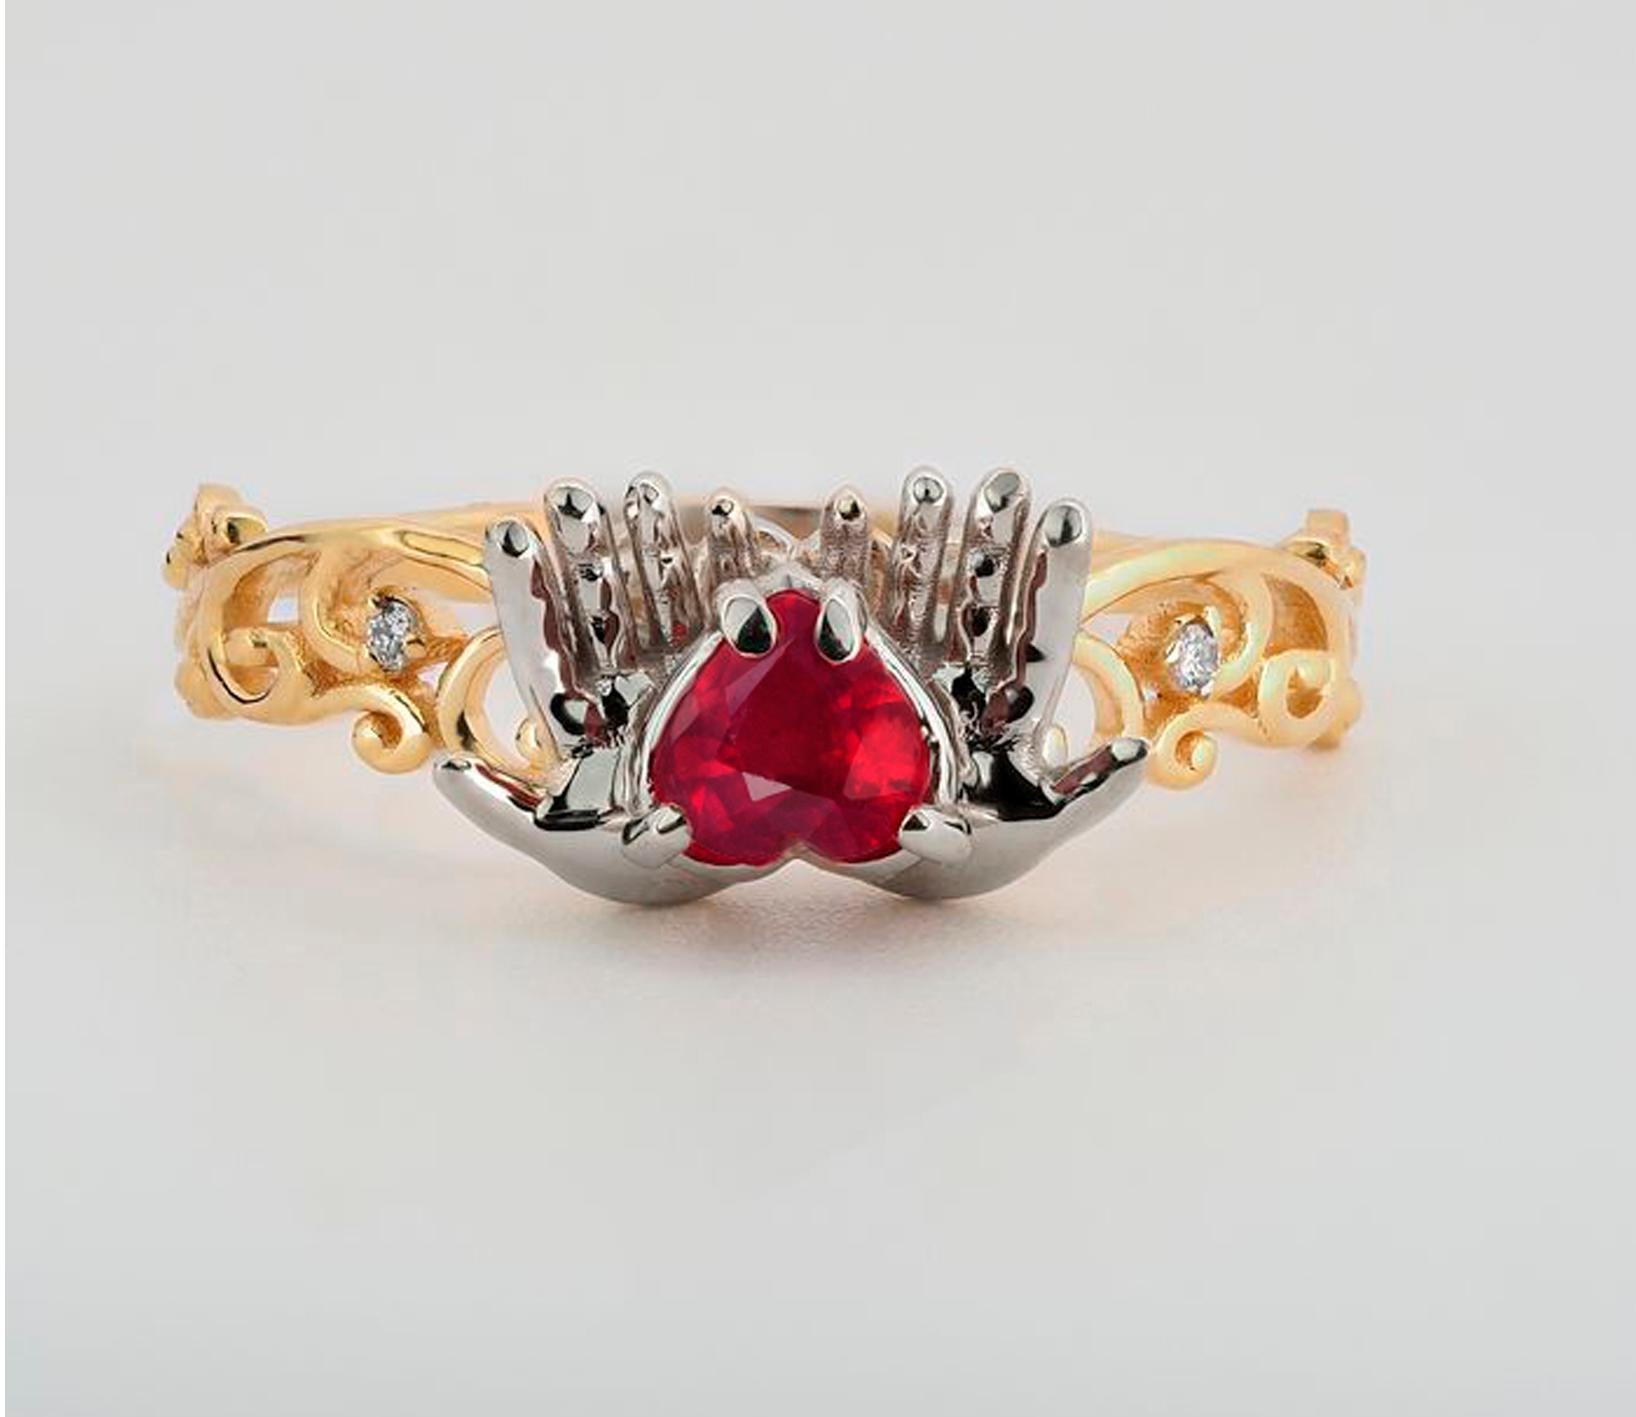 For Sale:  Heart ruby ring in 14 karat gold. July birthstone ruby ring 3